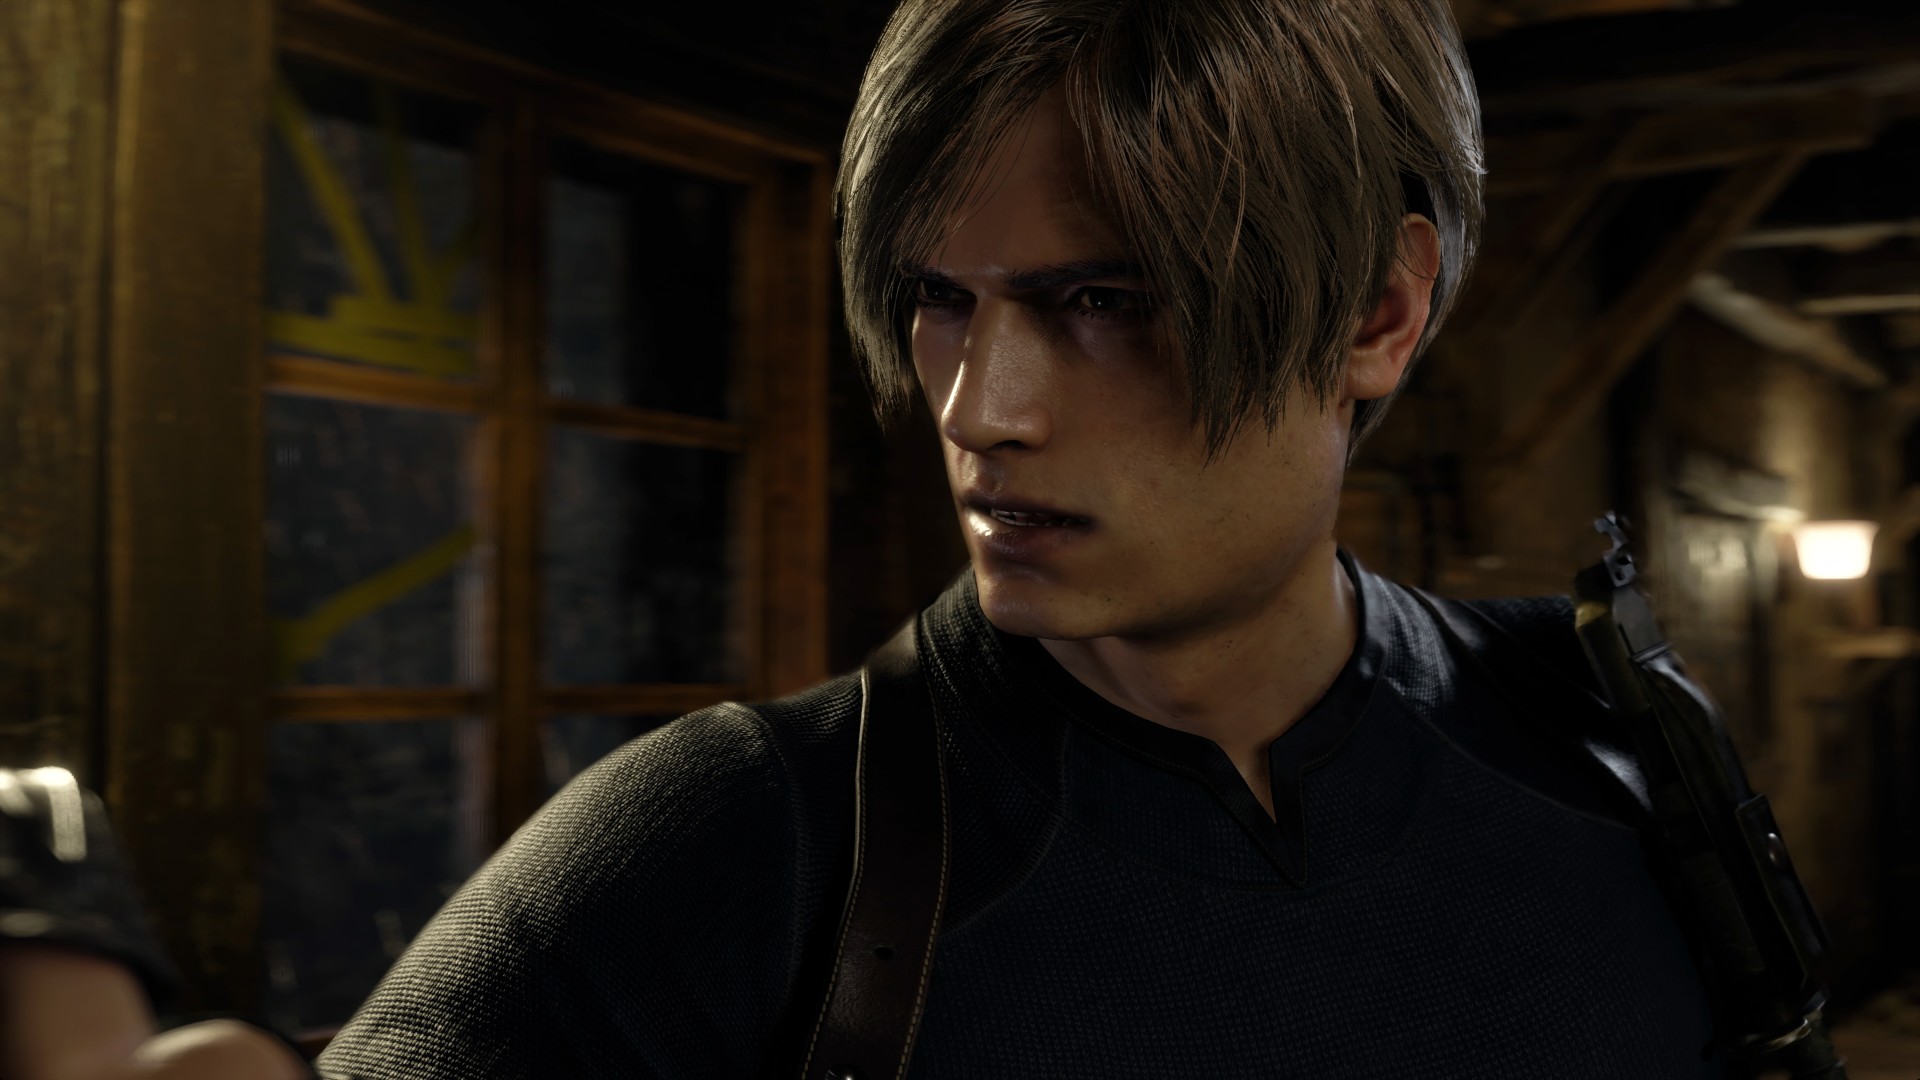 Resident Evil 4 Remake: pre-order bonuses and special editions